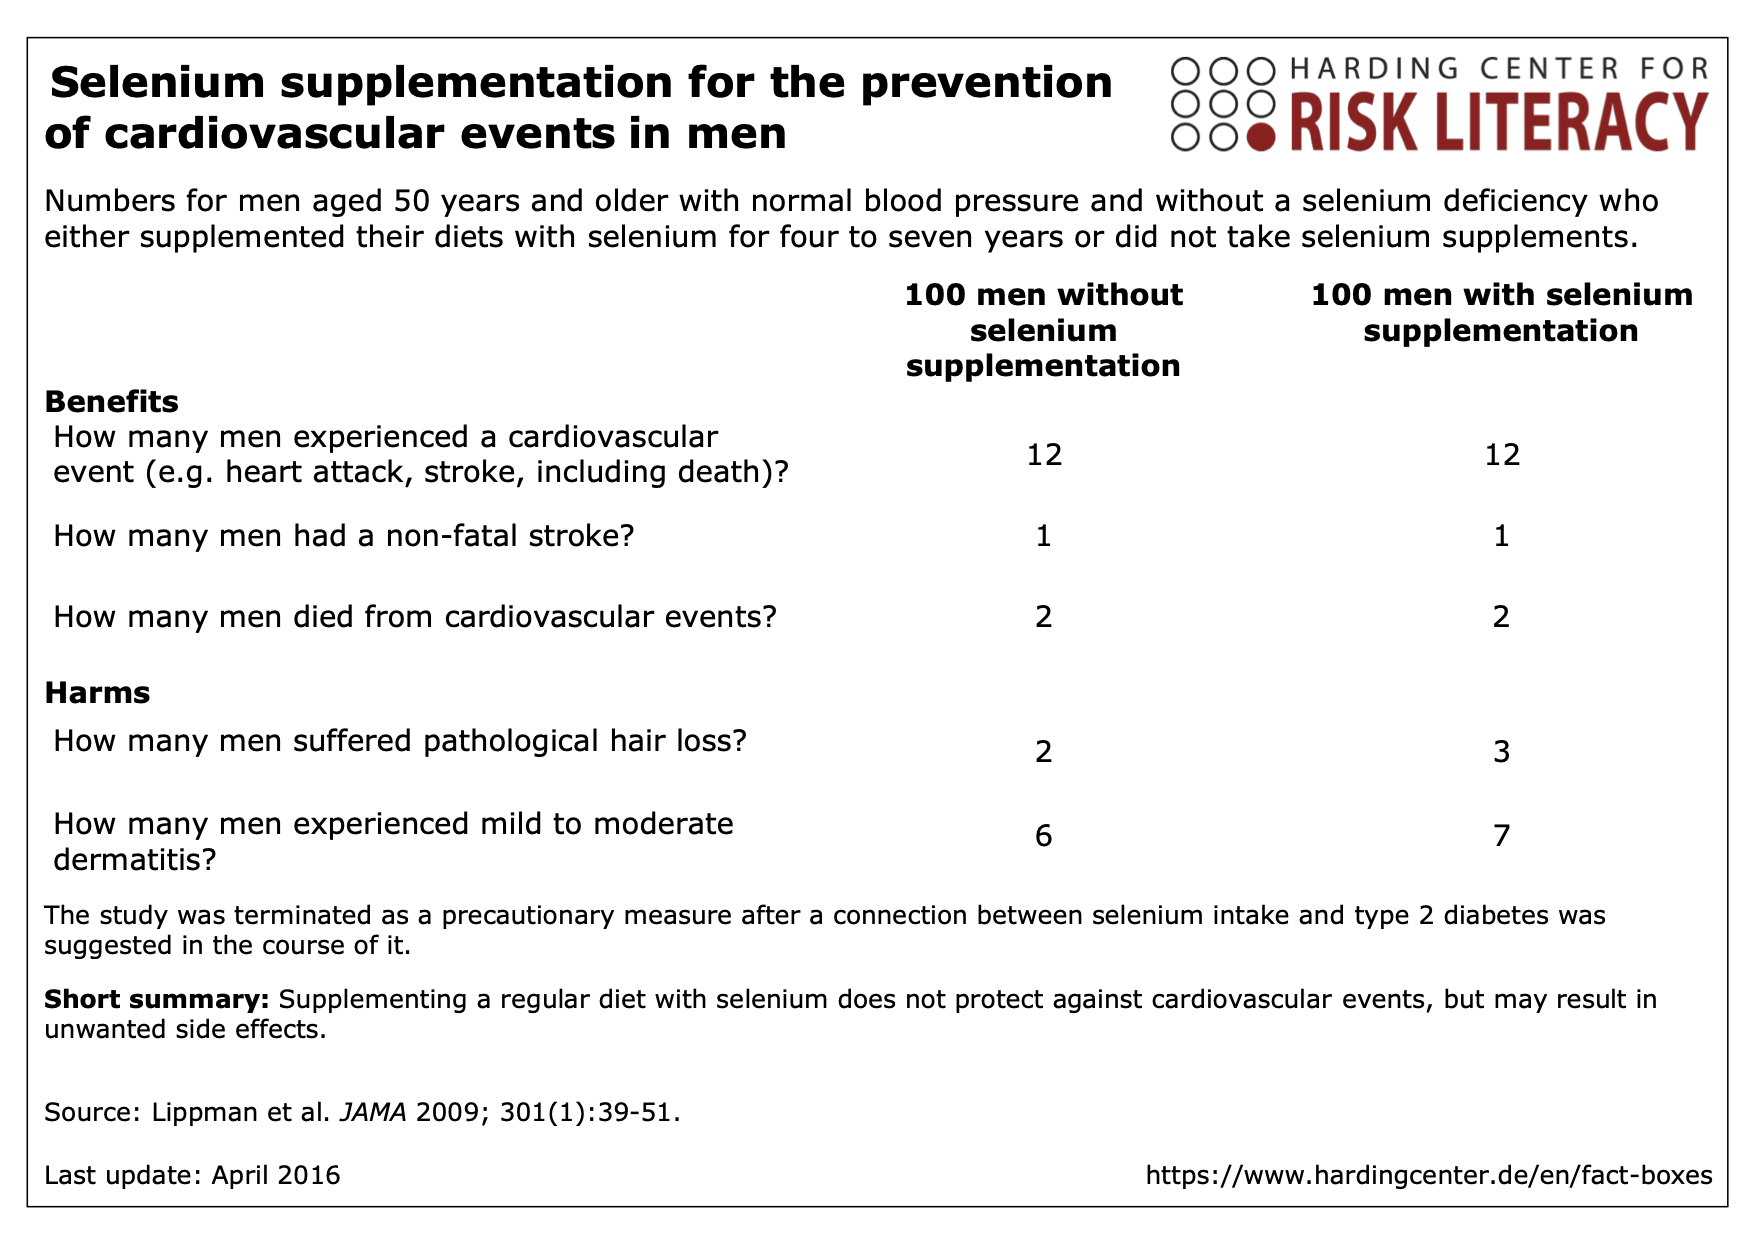 Fact box selenium supplementation for the prevention of cardiovascular events in men